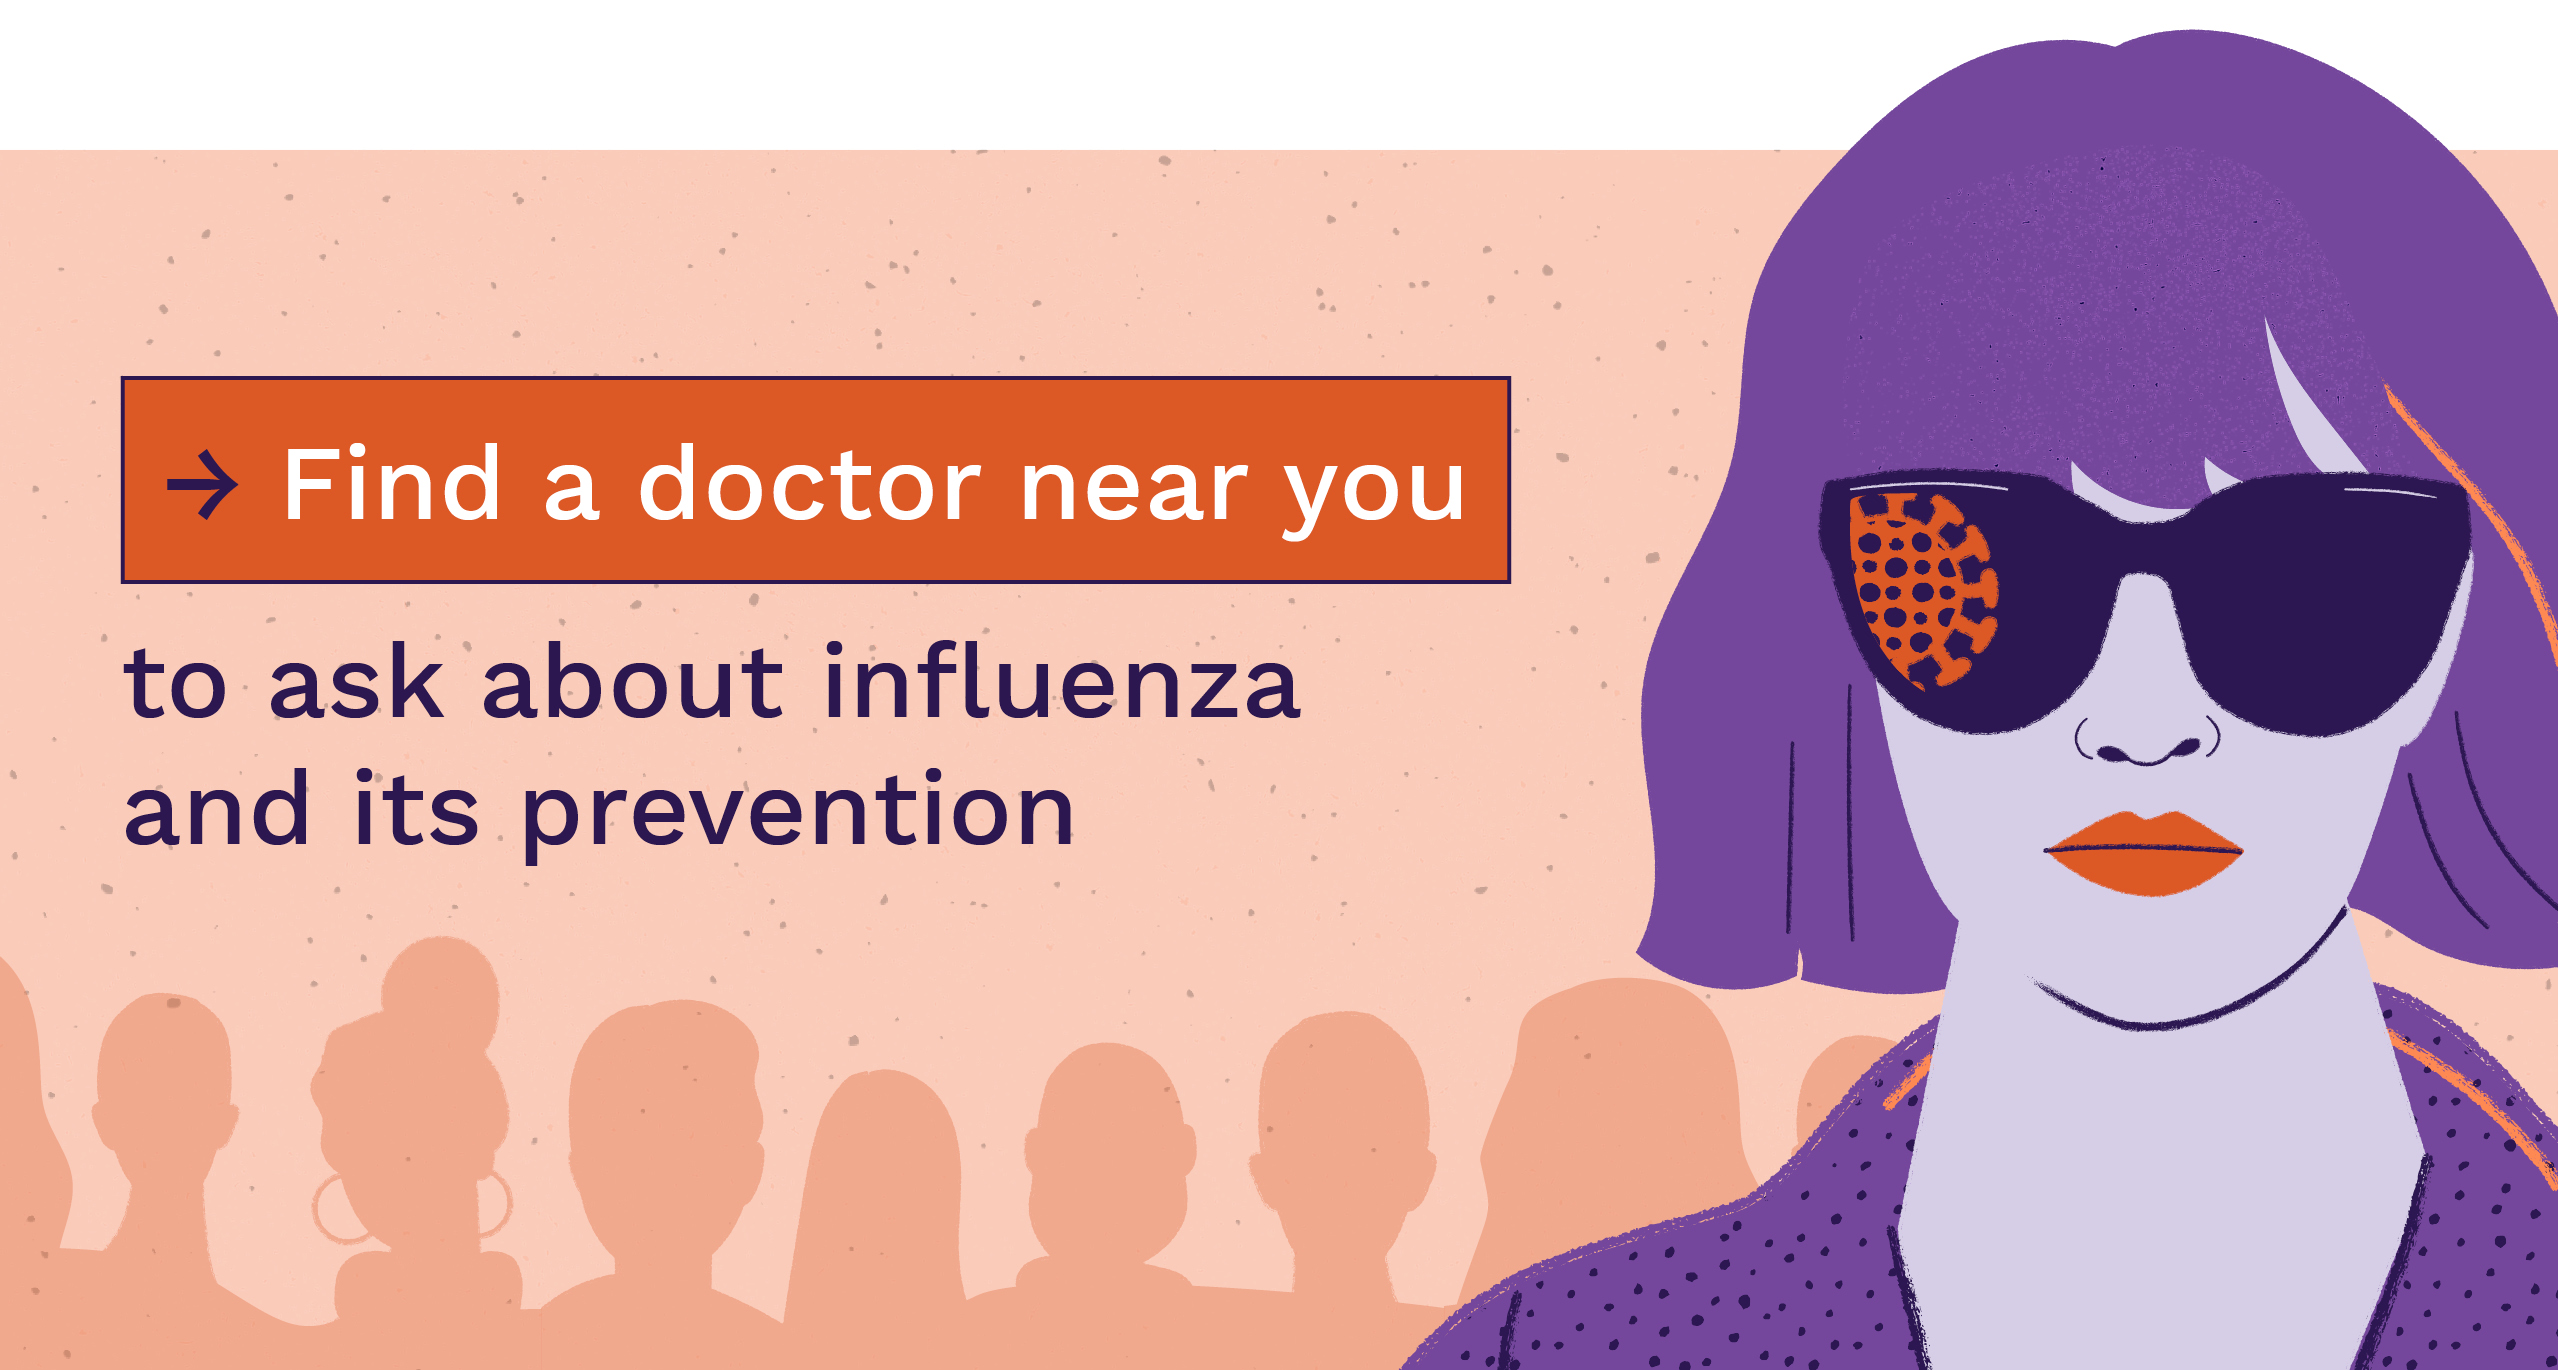 Find a doctor near you to ask about influenza and its prevention